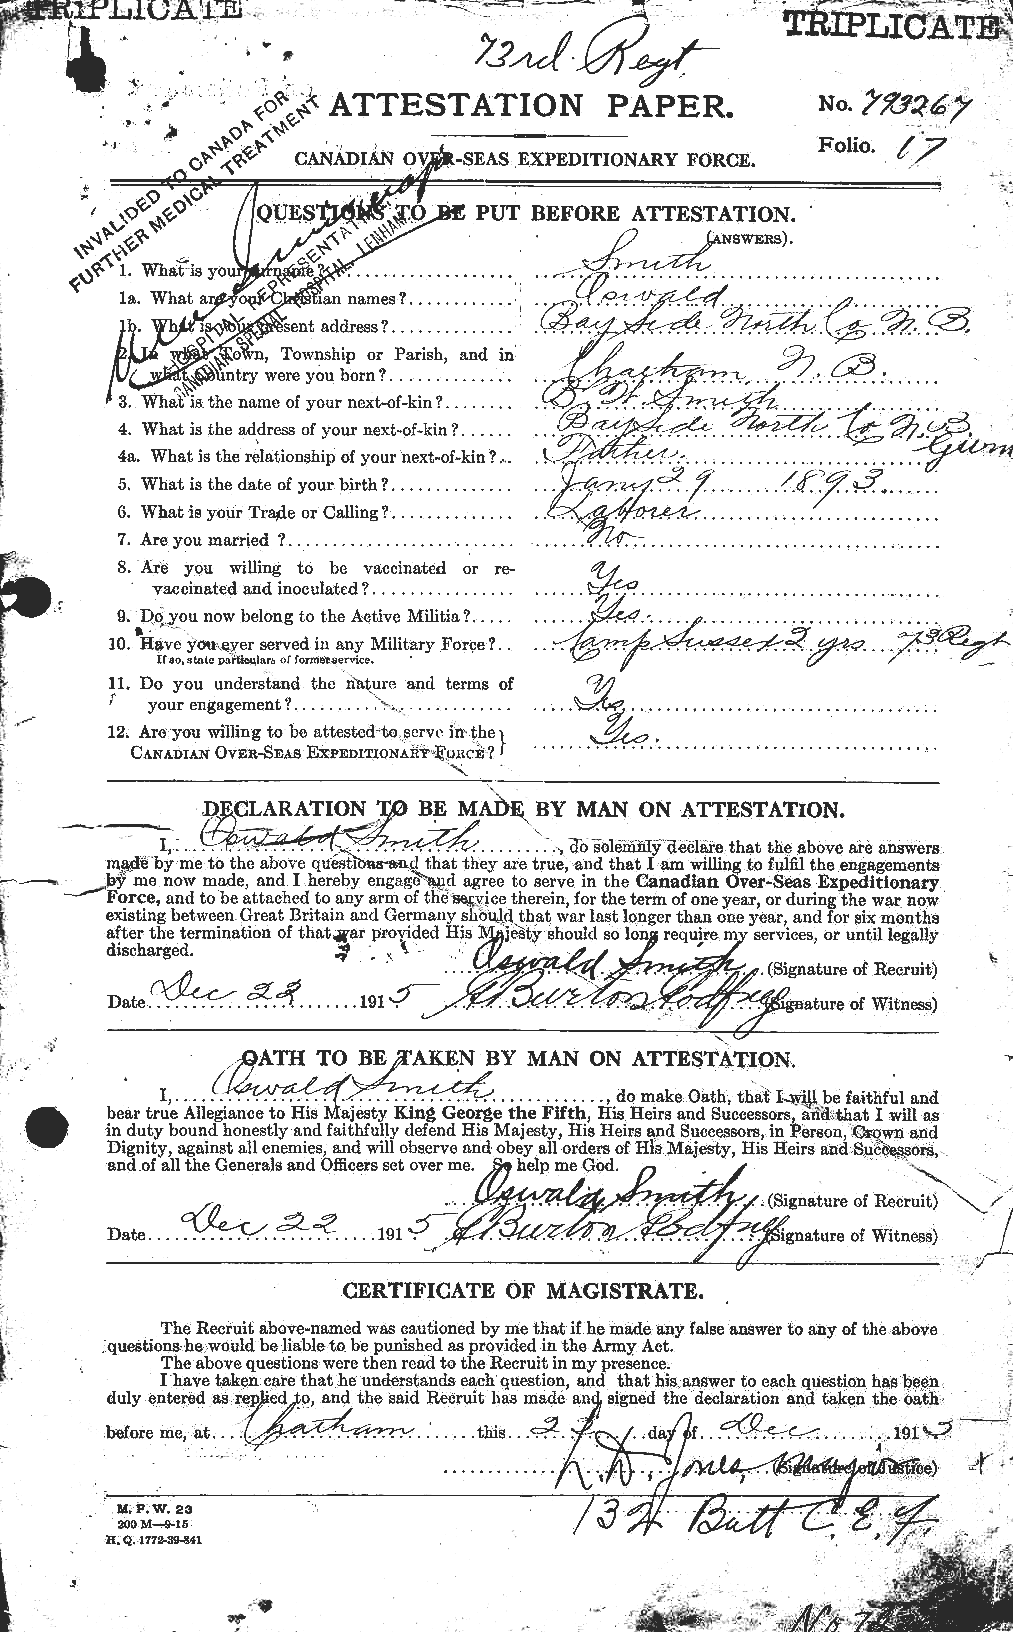 Personnel Records of the First World War - CEF 622114a